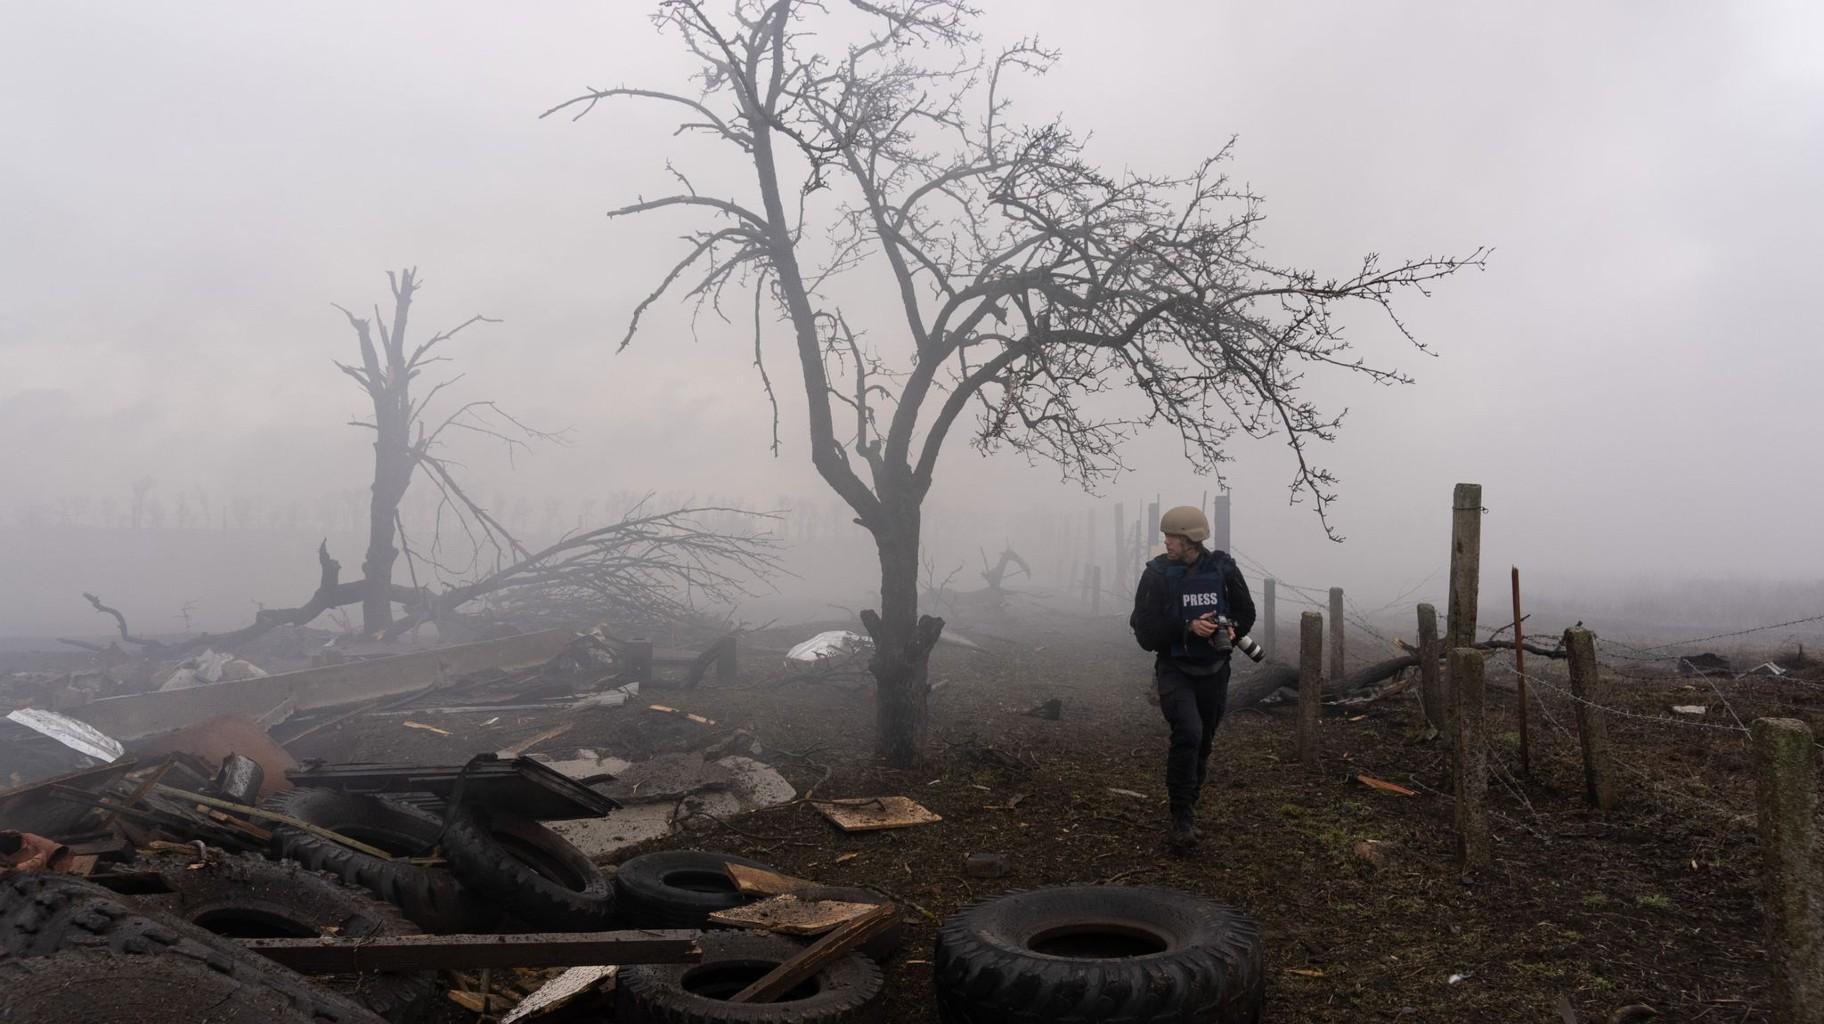 Photographer Evgeniy Maloletka picks his way through the aftermath of a Russian attack in Mariupol, Ukraine, Feb. 24, 2022. Still from FRONTLINE PBS and AP’s feature film “20 Days in Mariupol." (AP Photo / Mstyslav Chernov)